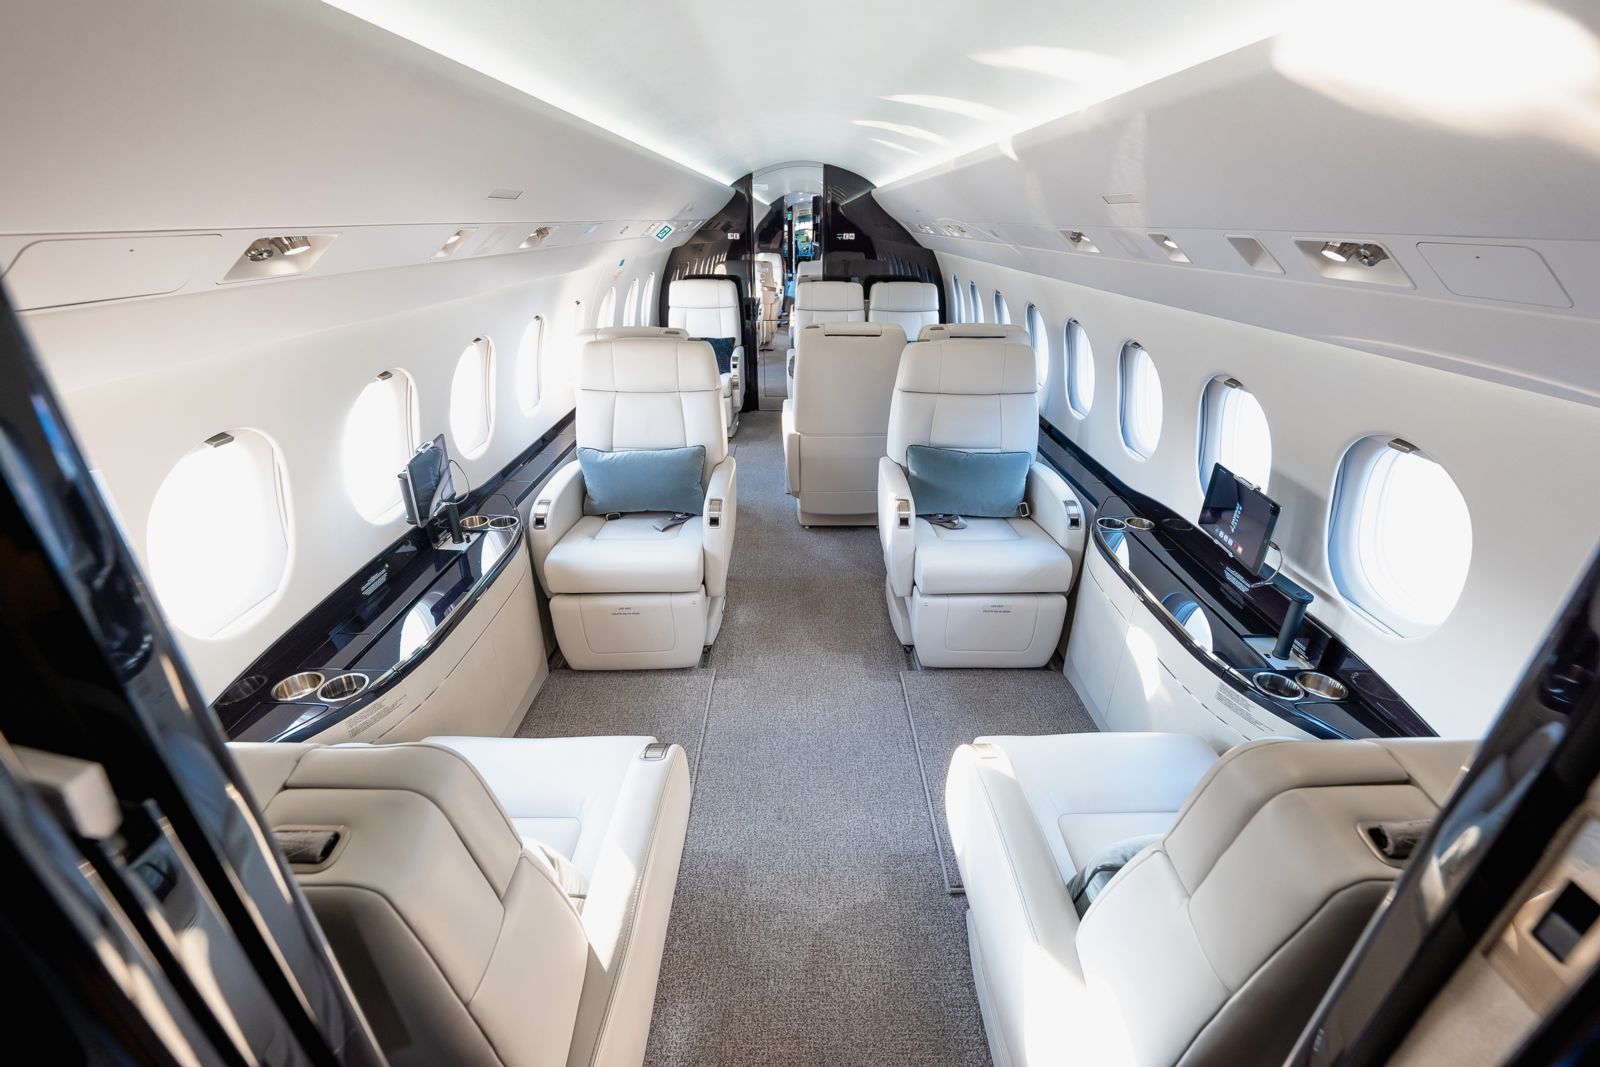 Dassault Falcon 2000LXS  S/N 370 for sale | gallery image: /userfiles/images/falcon%202000_ps-ara_interior_ago23-1.jpg